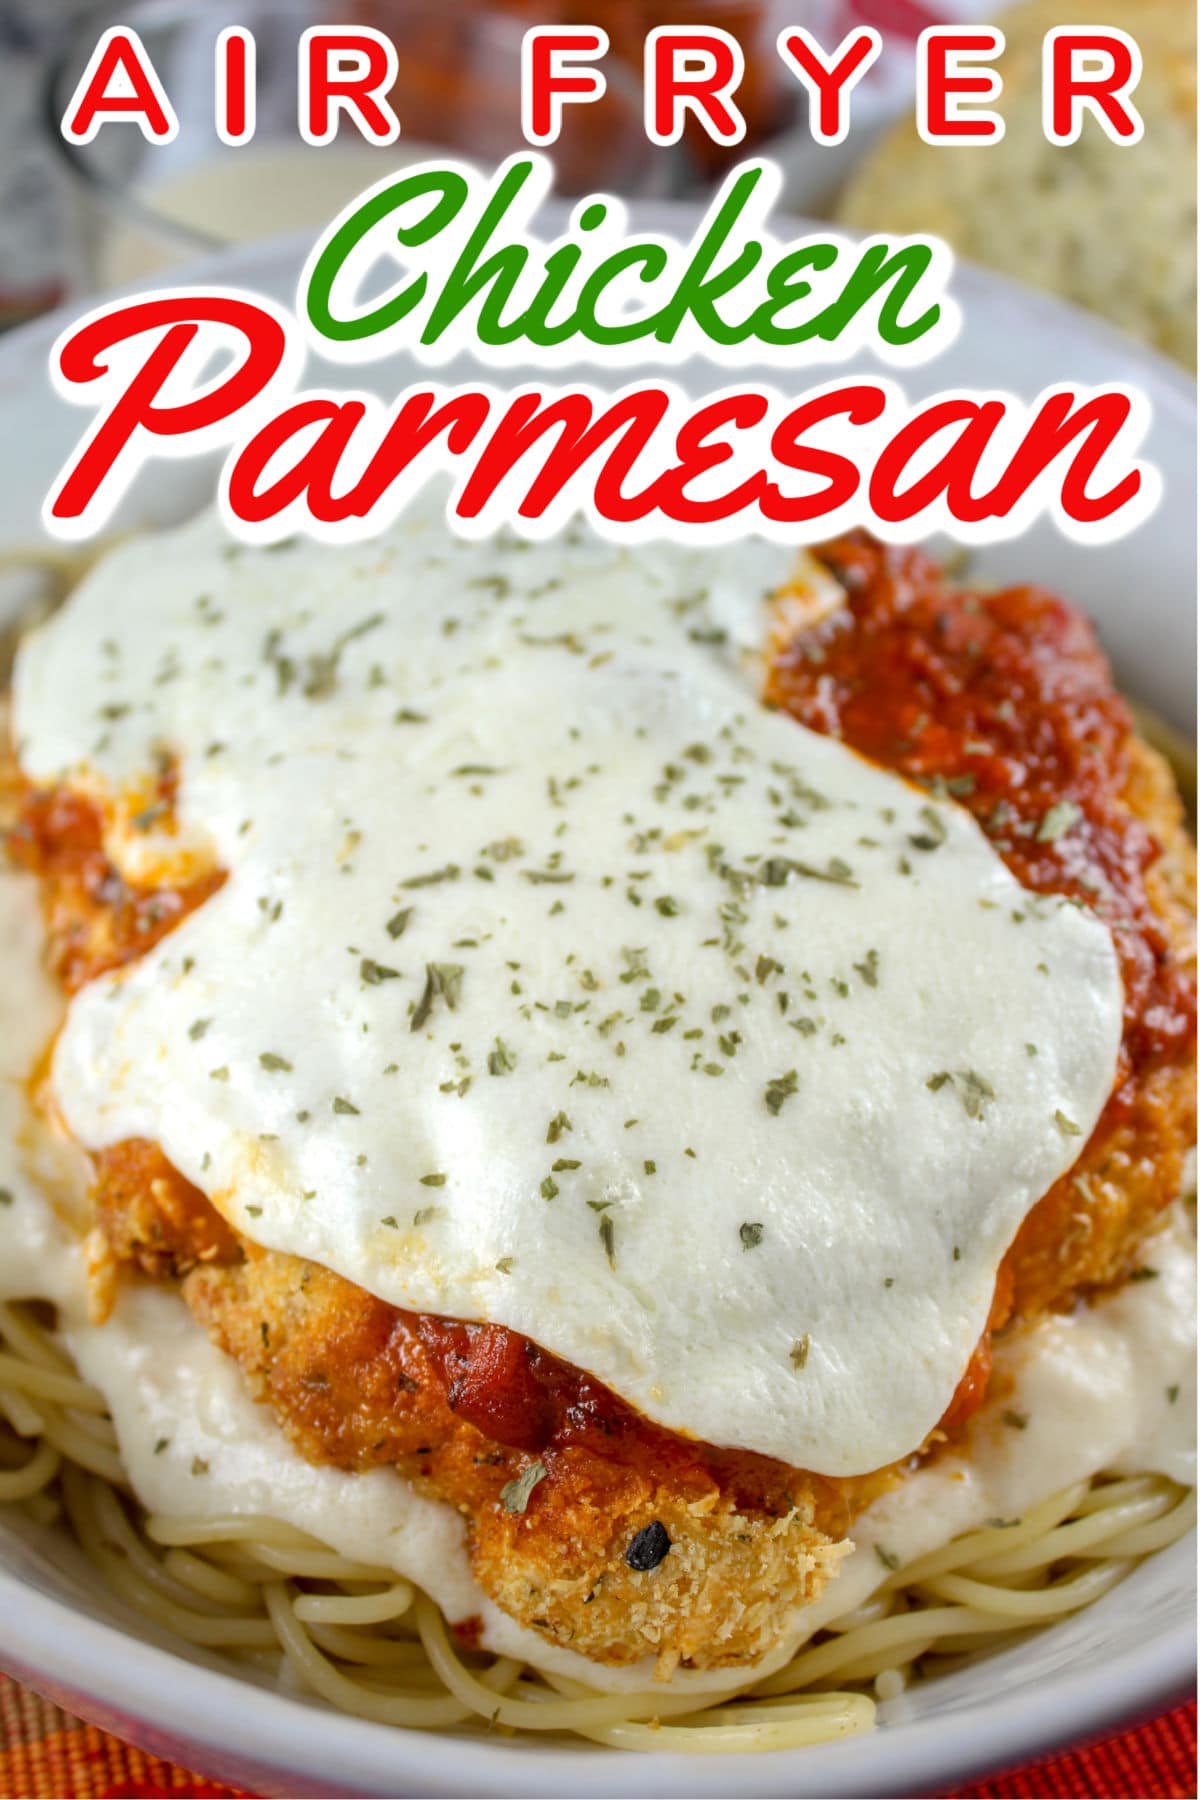 Air Fryer Chicken Parmesan is so delicious! I've been making it every week - and my dinner is ready in under 20 minutes! I've been so excited to share this with you - especially my jazzed up version with a little alfredo sauce too!  via @foodhussy